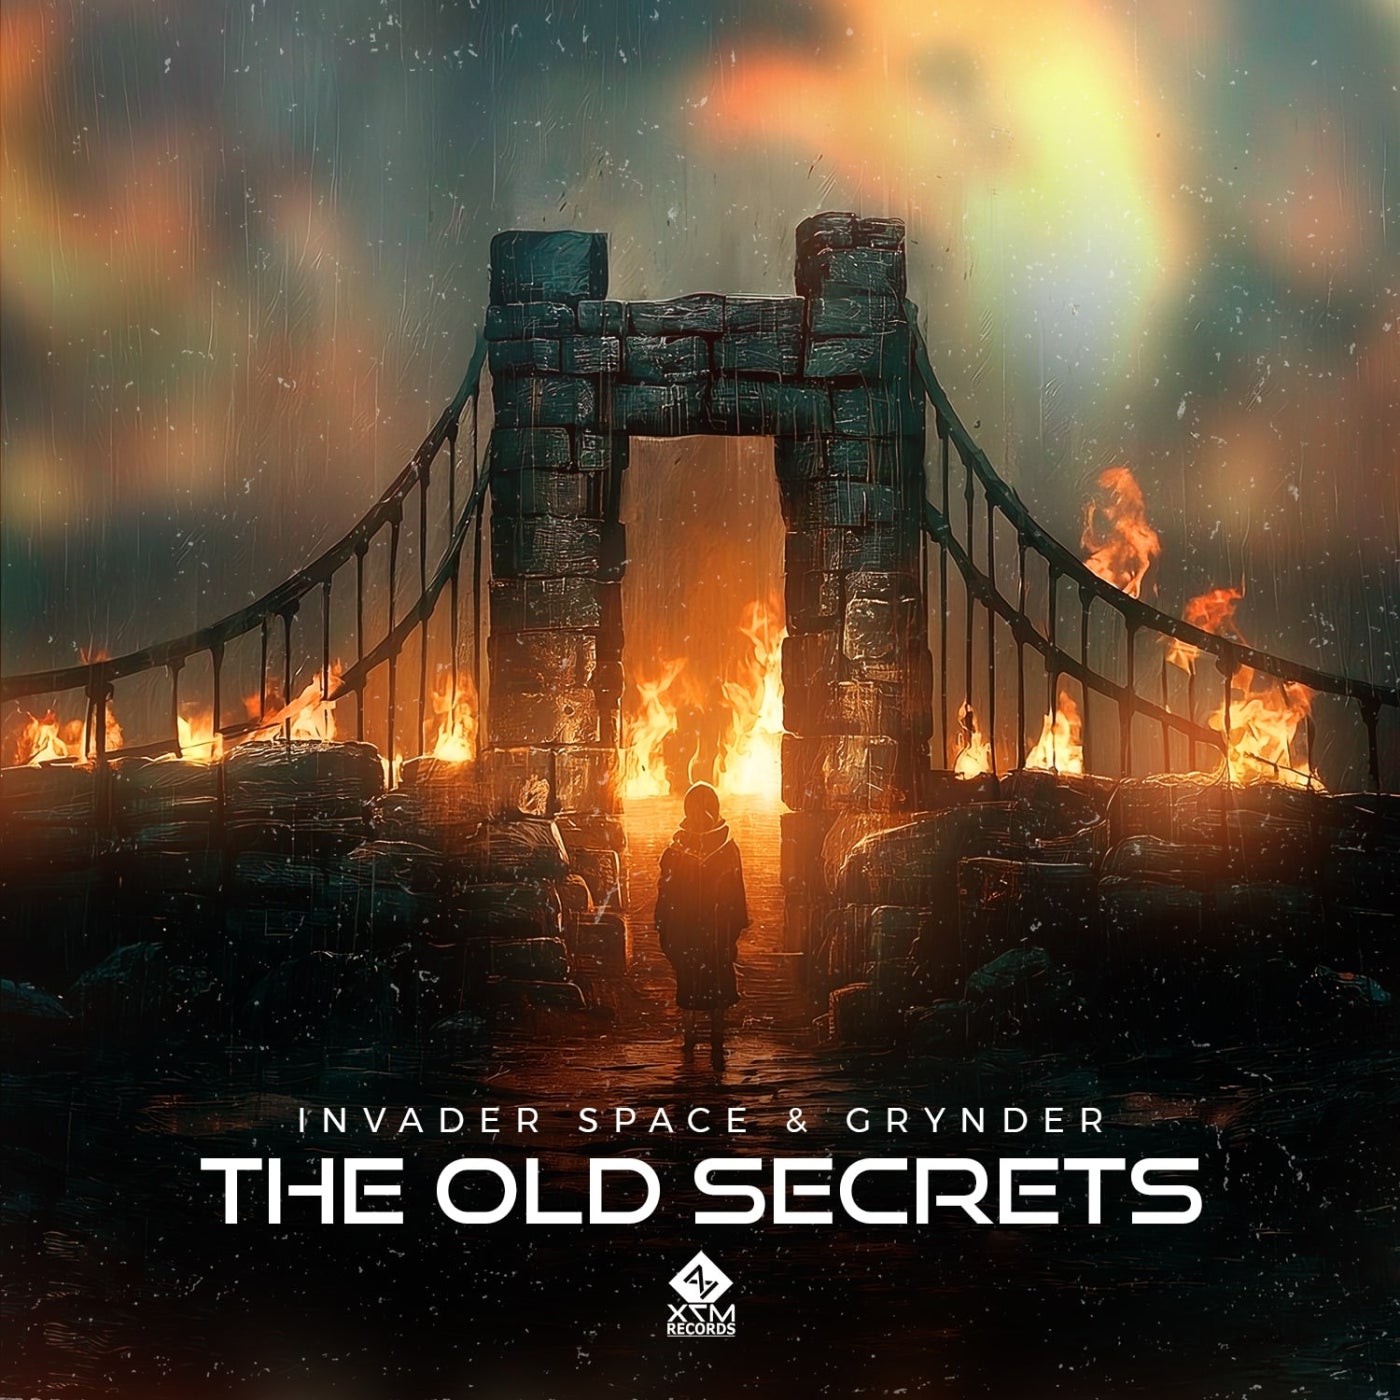 The Old Secrets